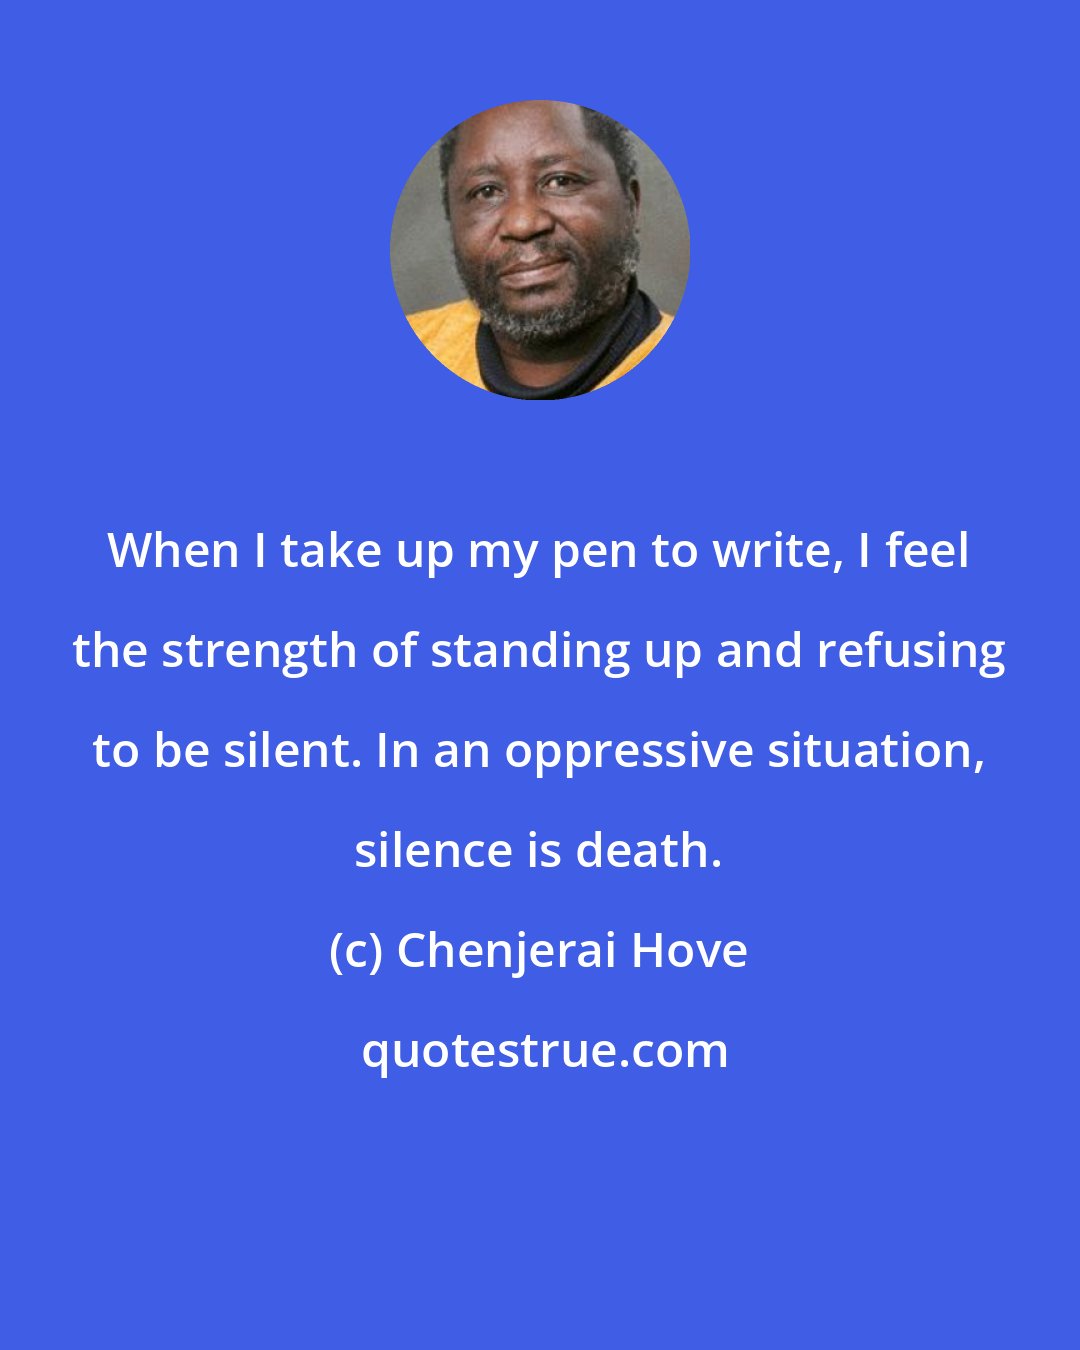 Chenjerai Hove: When I take up my pen to write, I feel the strength of standing up and refusing to be silent. In an oppressive situation, silence is death.